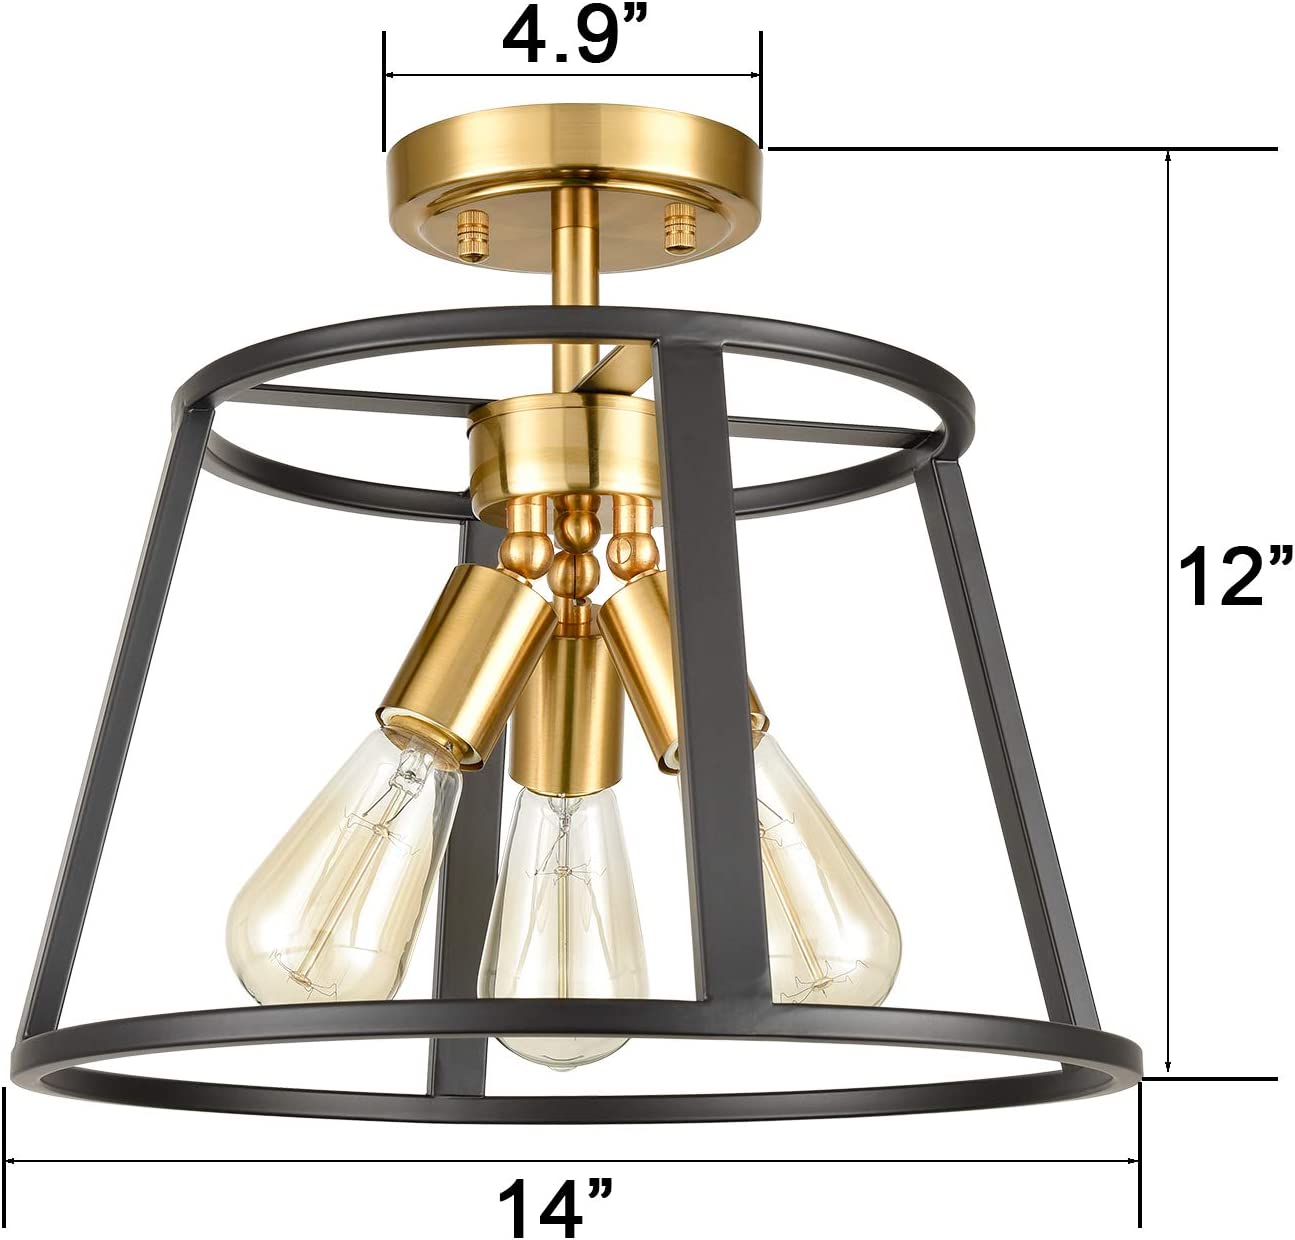 3 light semi flush mount ceiling light cage ceiling lamp with brass and black finish